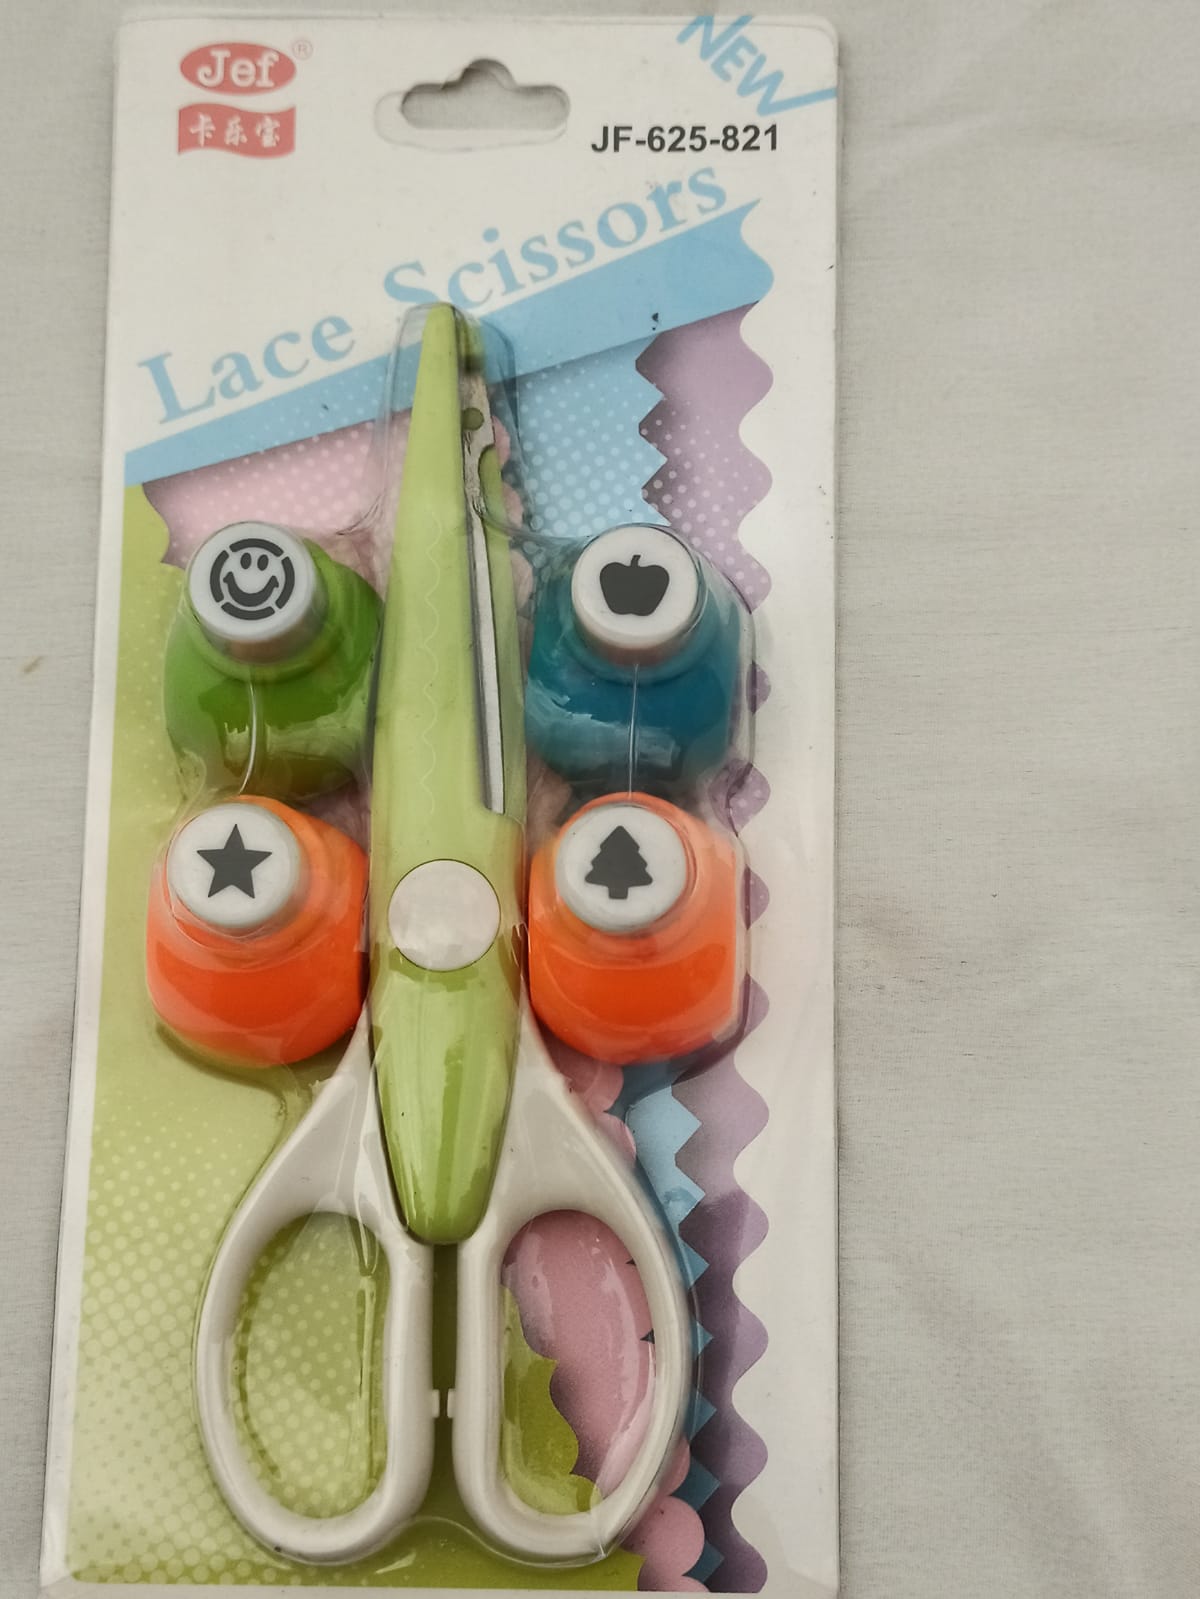 Lace Scissors with Stamp